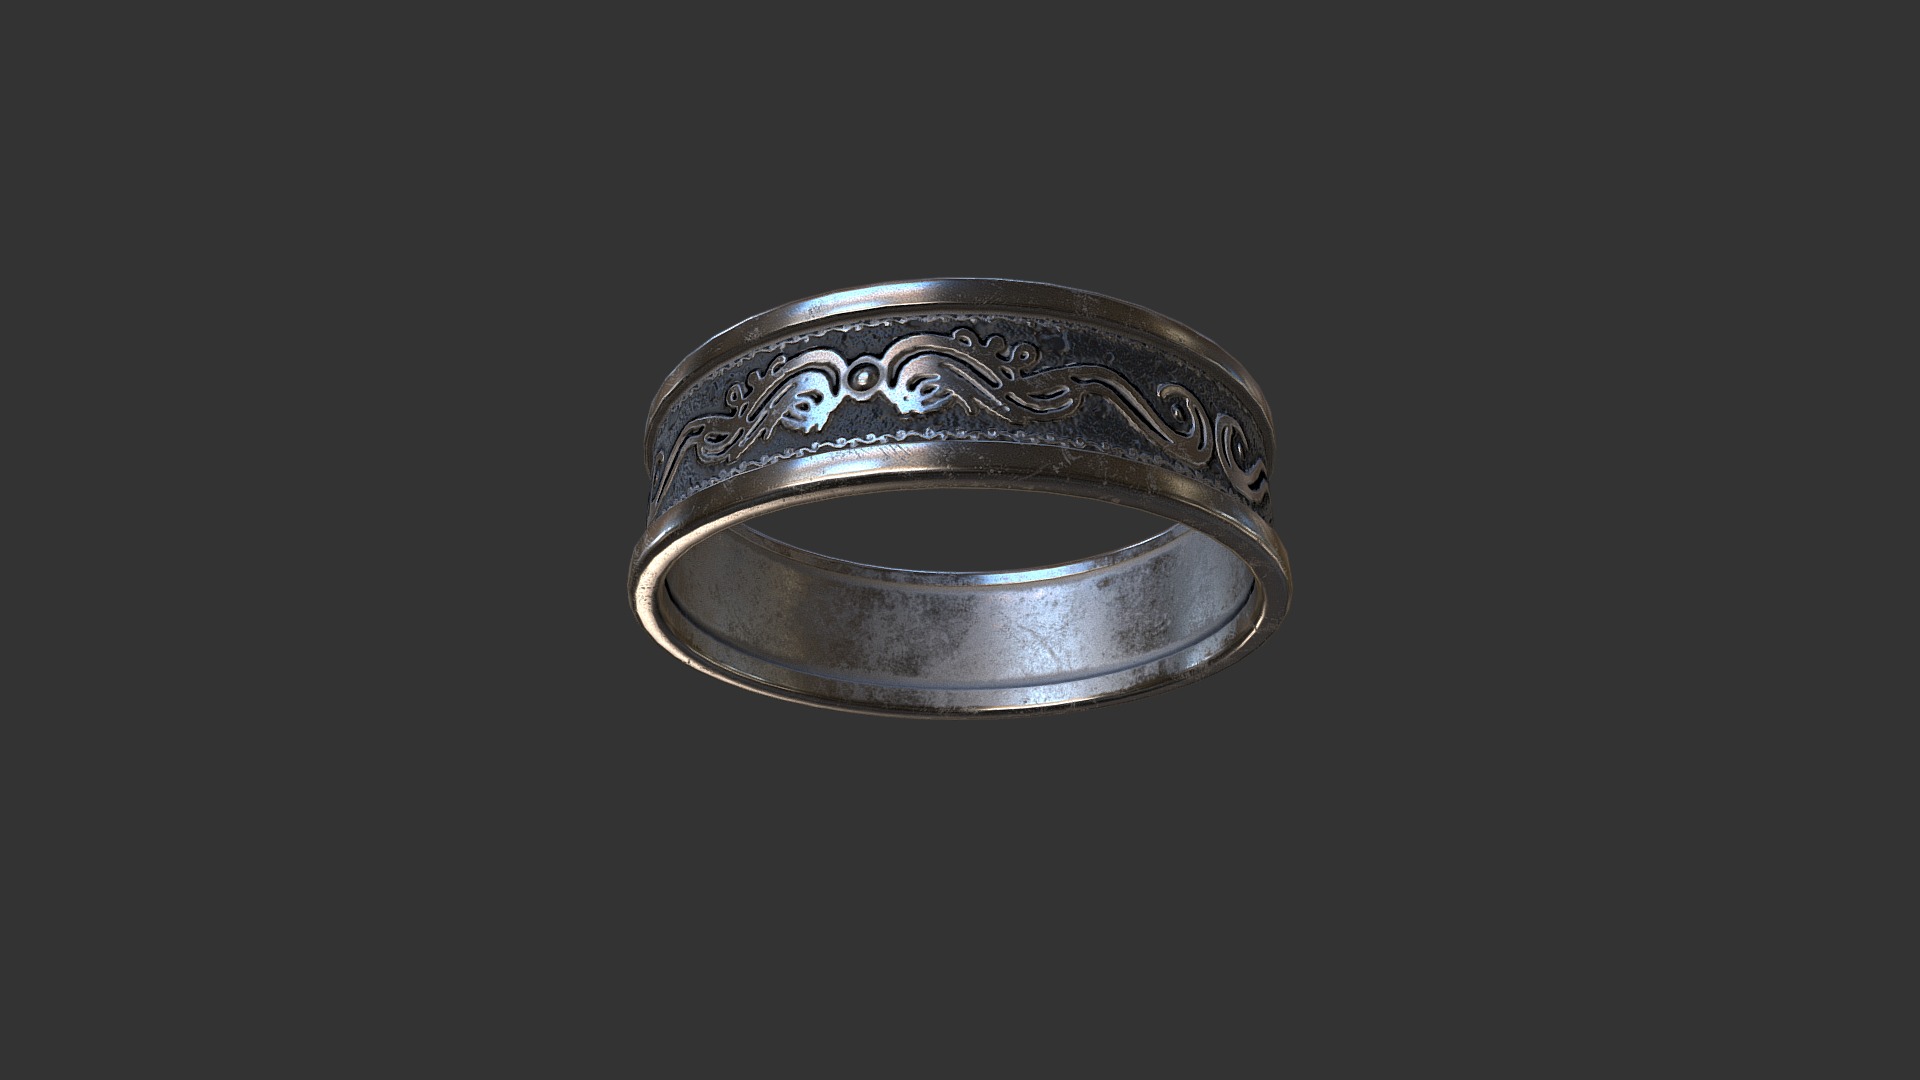 3D model Old Ring pbr - This is a 3D model of the Old Ring pbr. The 3D model is about a ring on a surface.